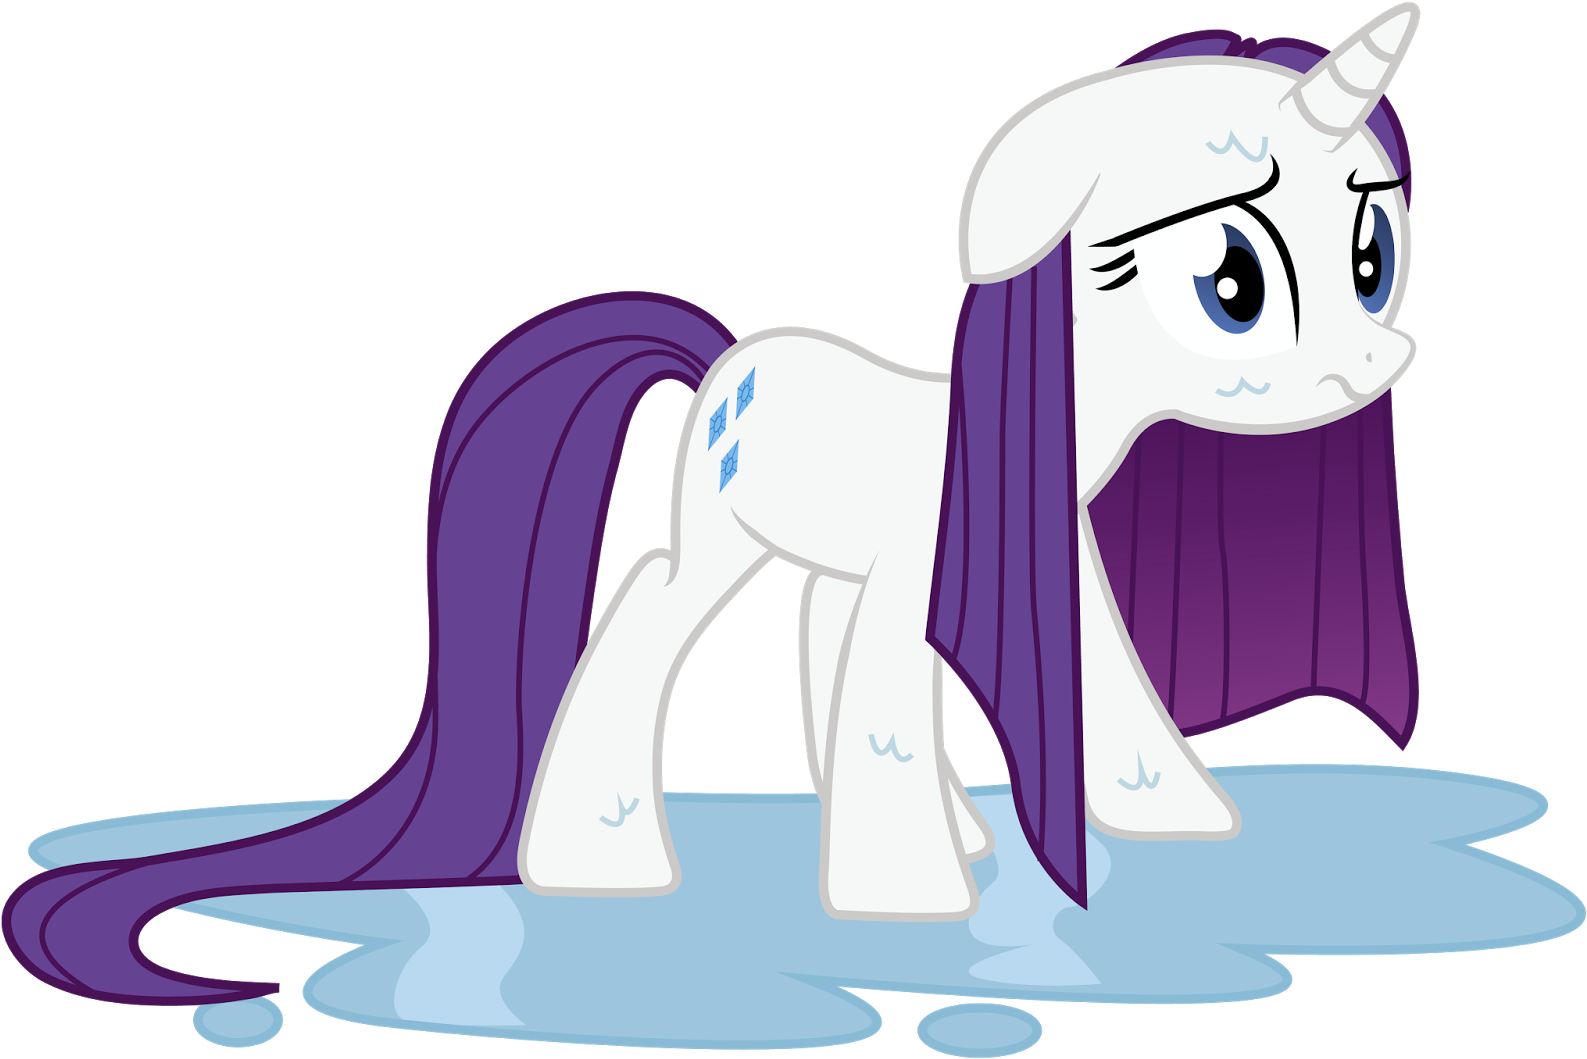 About A Week Ago, We Asked For Ice Bucket Challenge - My Little Pony Rarity Wet (1600x1066)